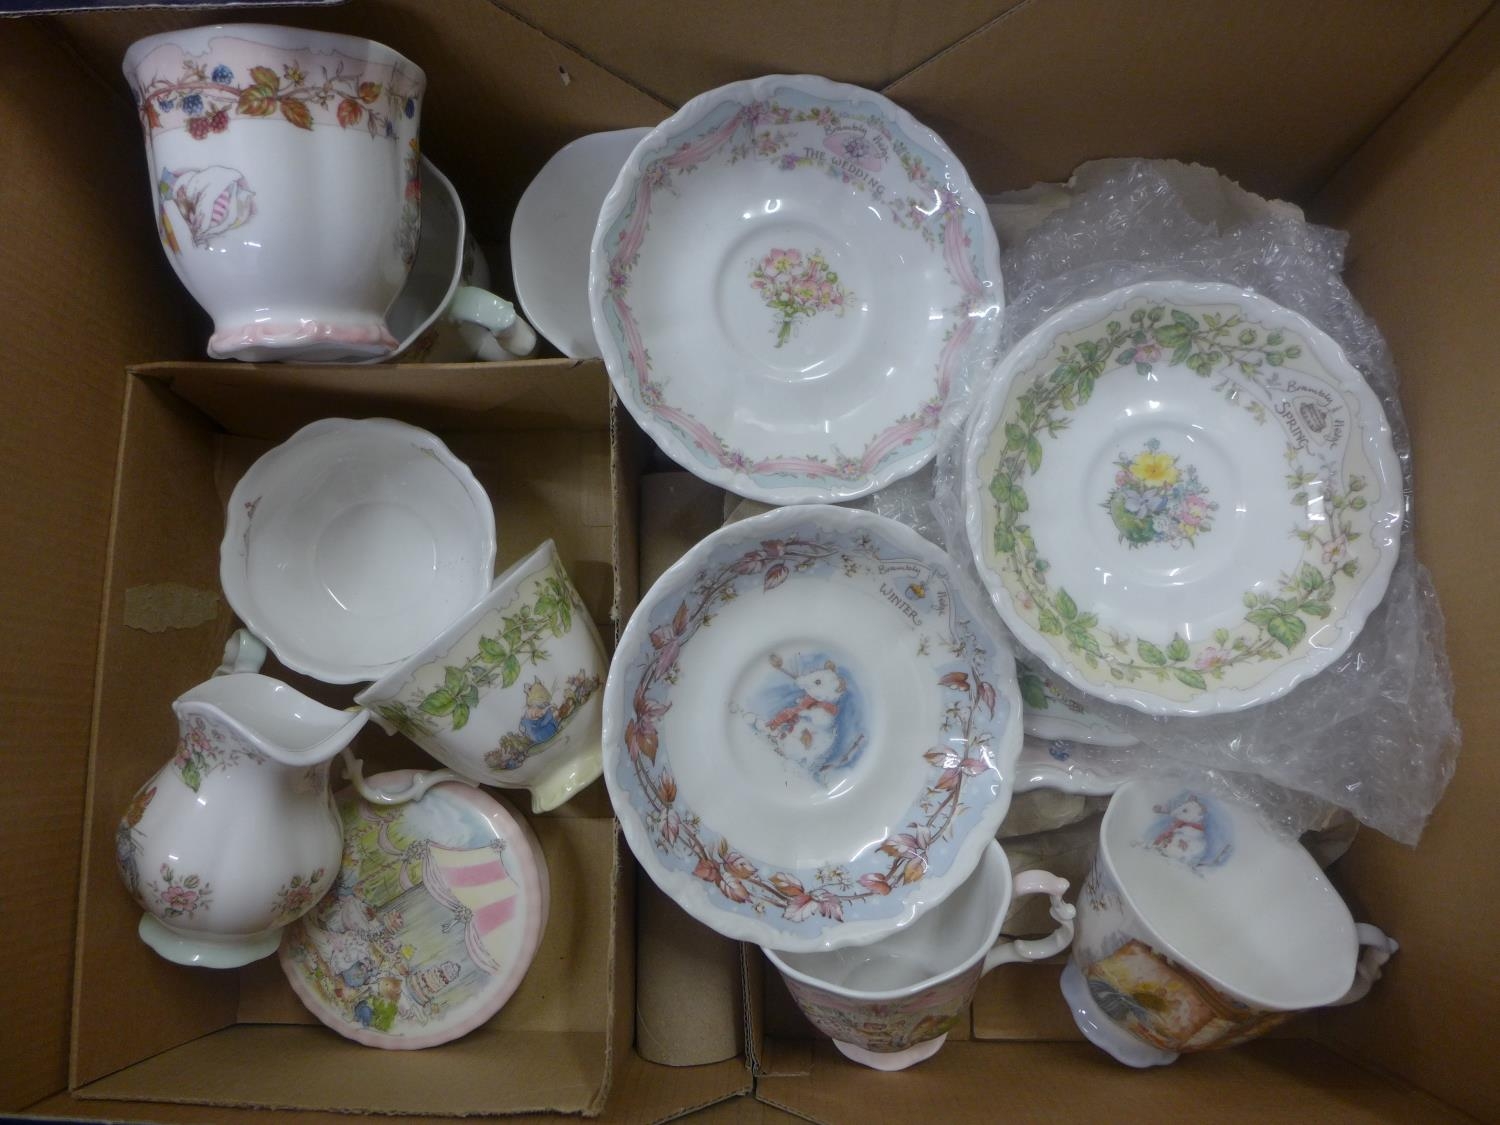 Royal Doulton Brambly Hedge The Wedding Collection. Not Royal